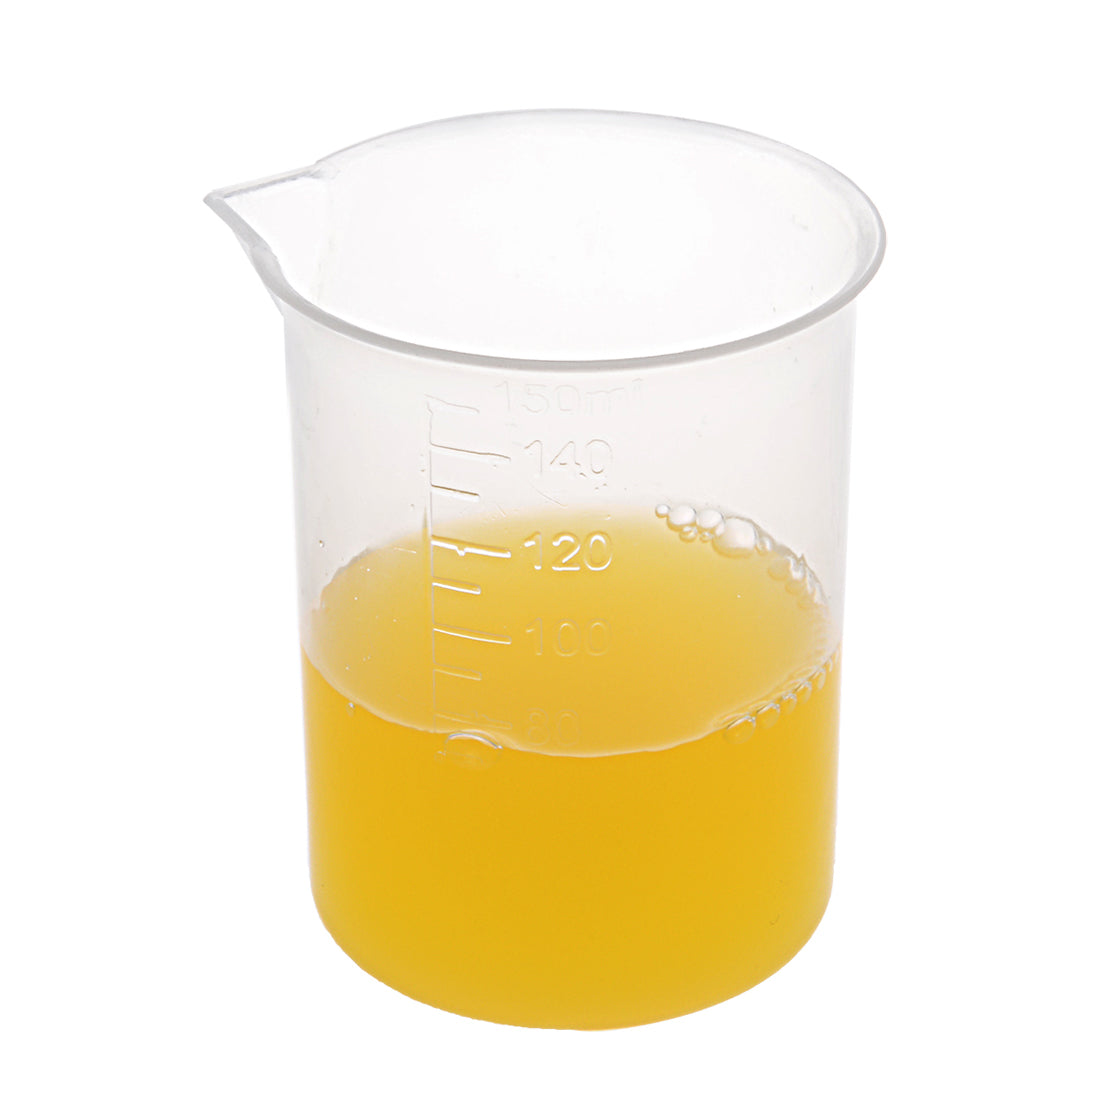 uxcell Uxcell 3pcs Measuring Cup Labs PP Graduated Beakers 150ml